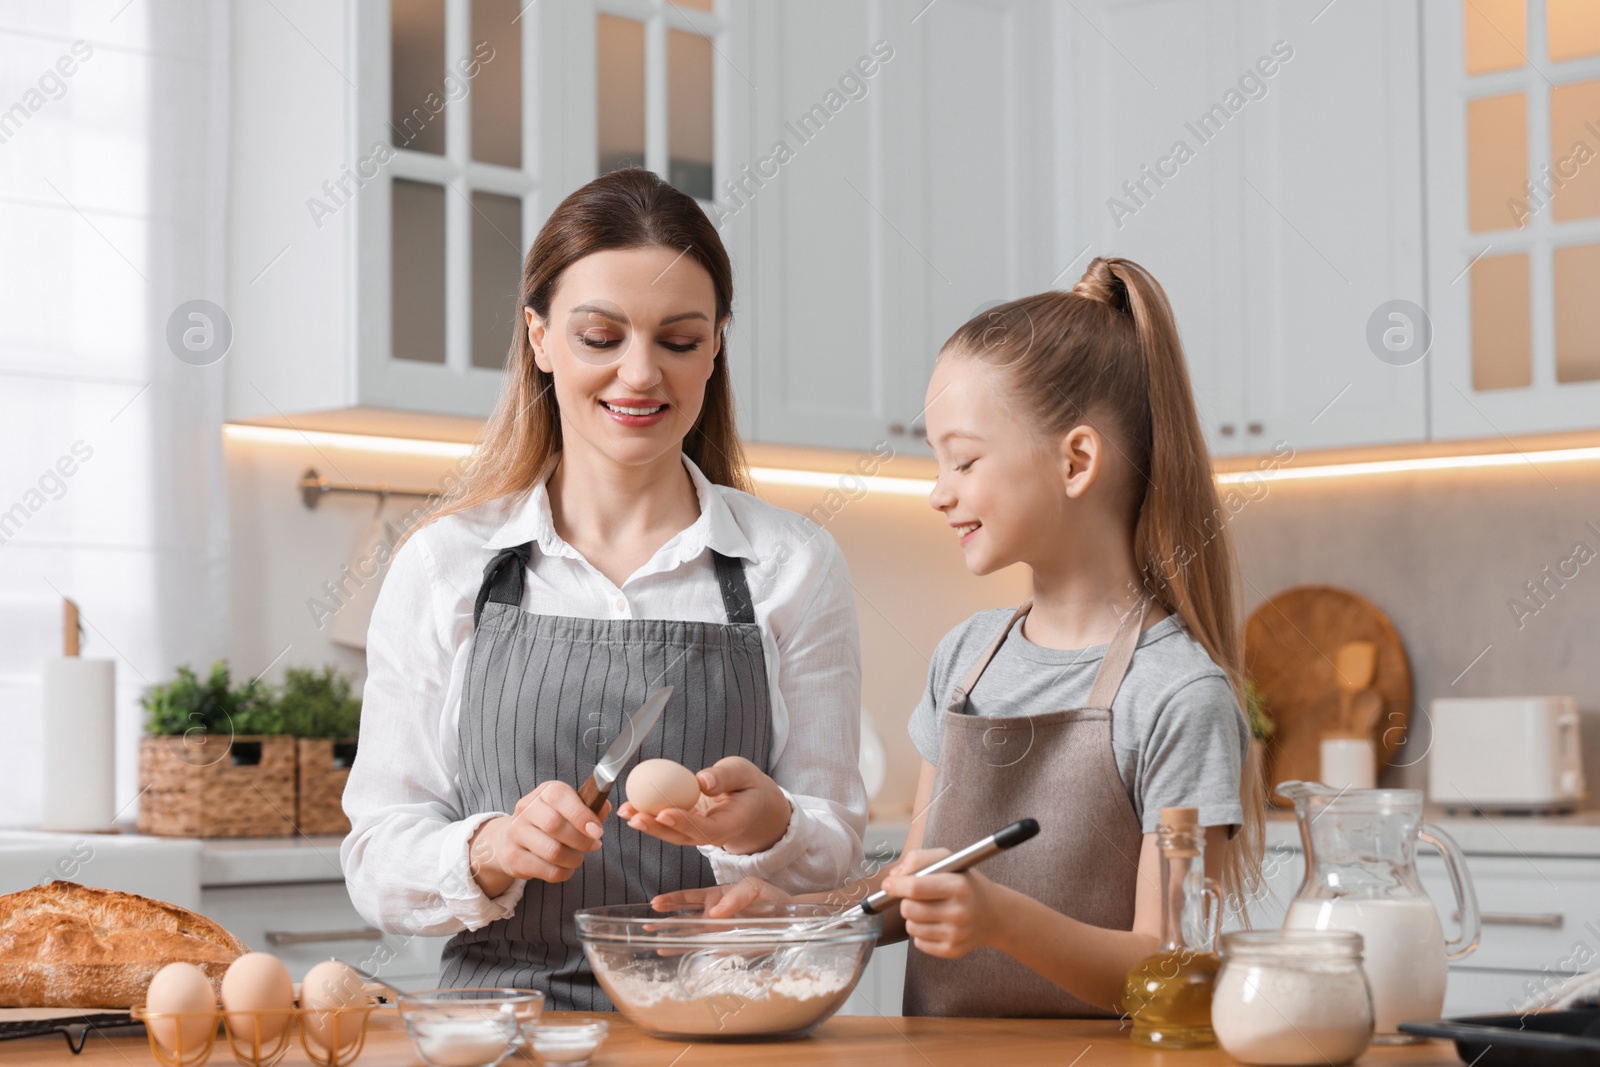 Photo of Making bread. Mother and her daughter preparing dough at wooden table in kitchen